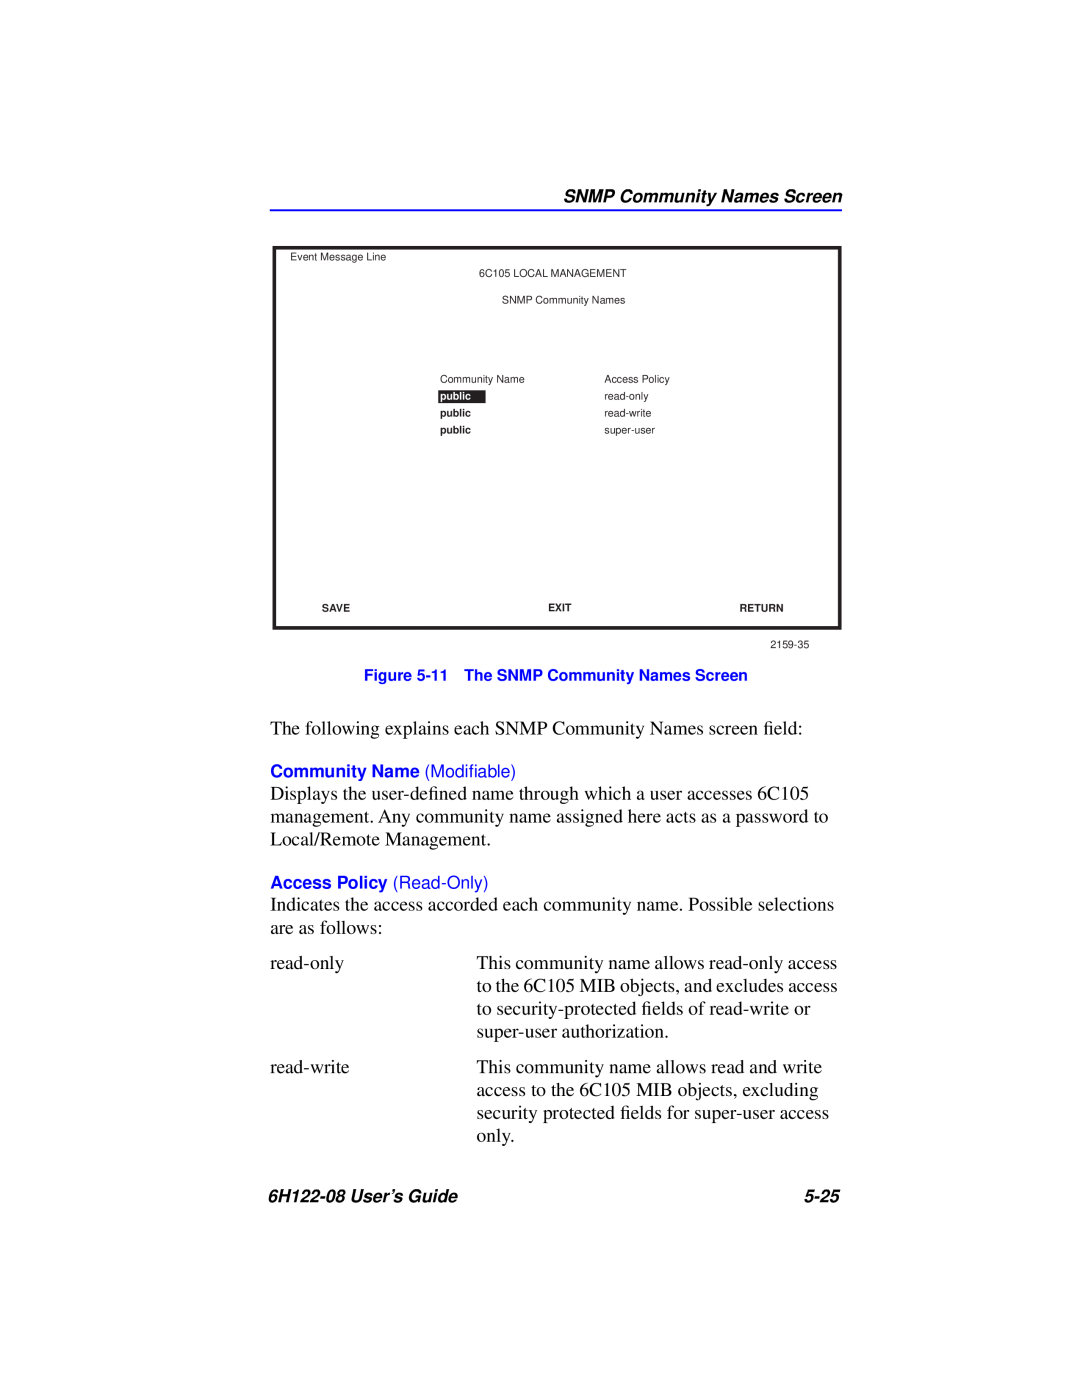 Cabletron Systems 6H122-08 manual The following explains each SNMP Community Names screen ﬁeld 